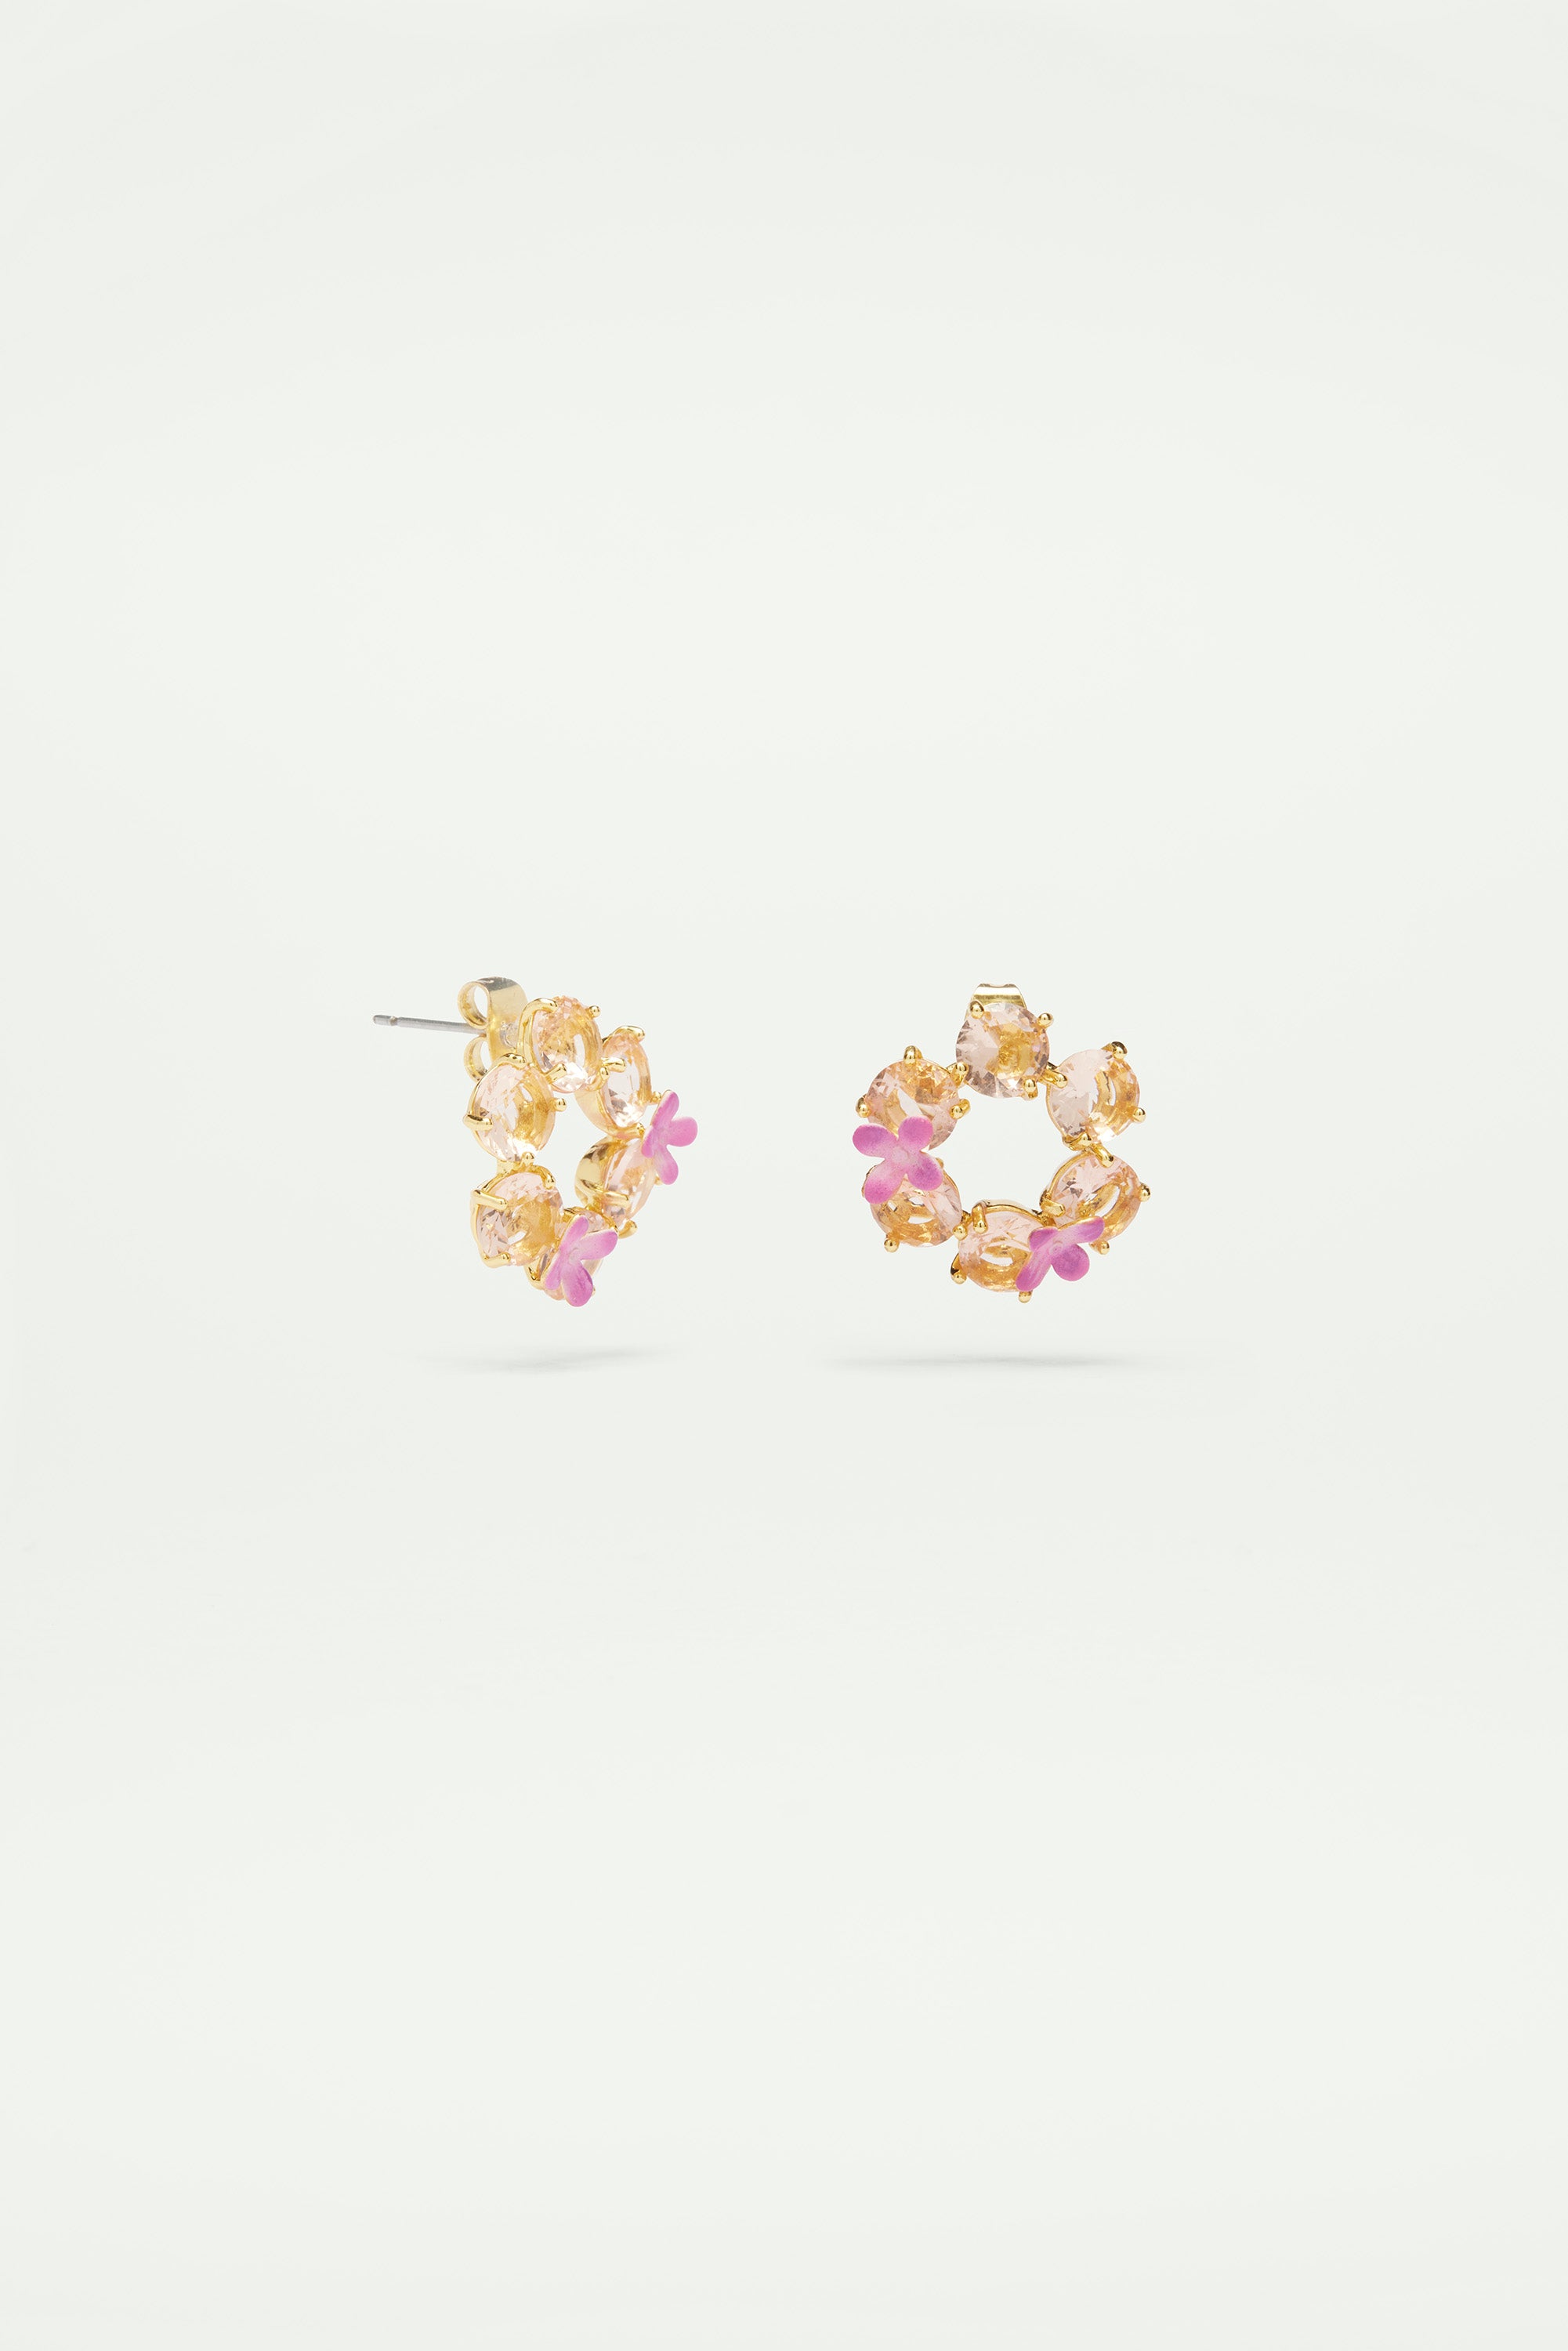 Apricot pink diamantine flower and 6 round stone post earrings